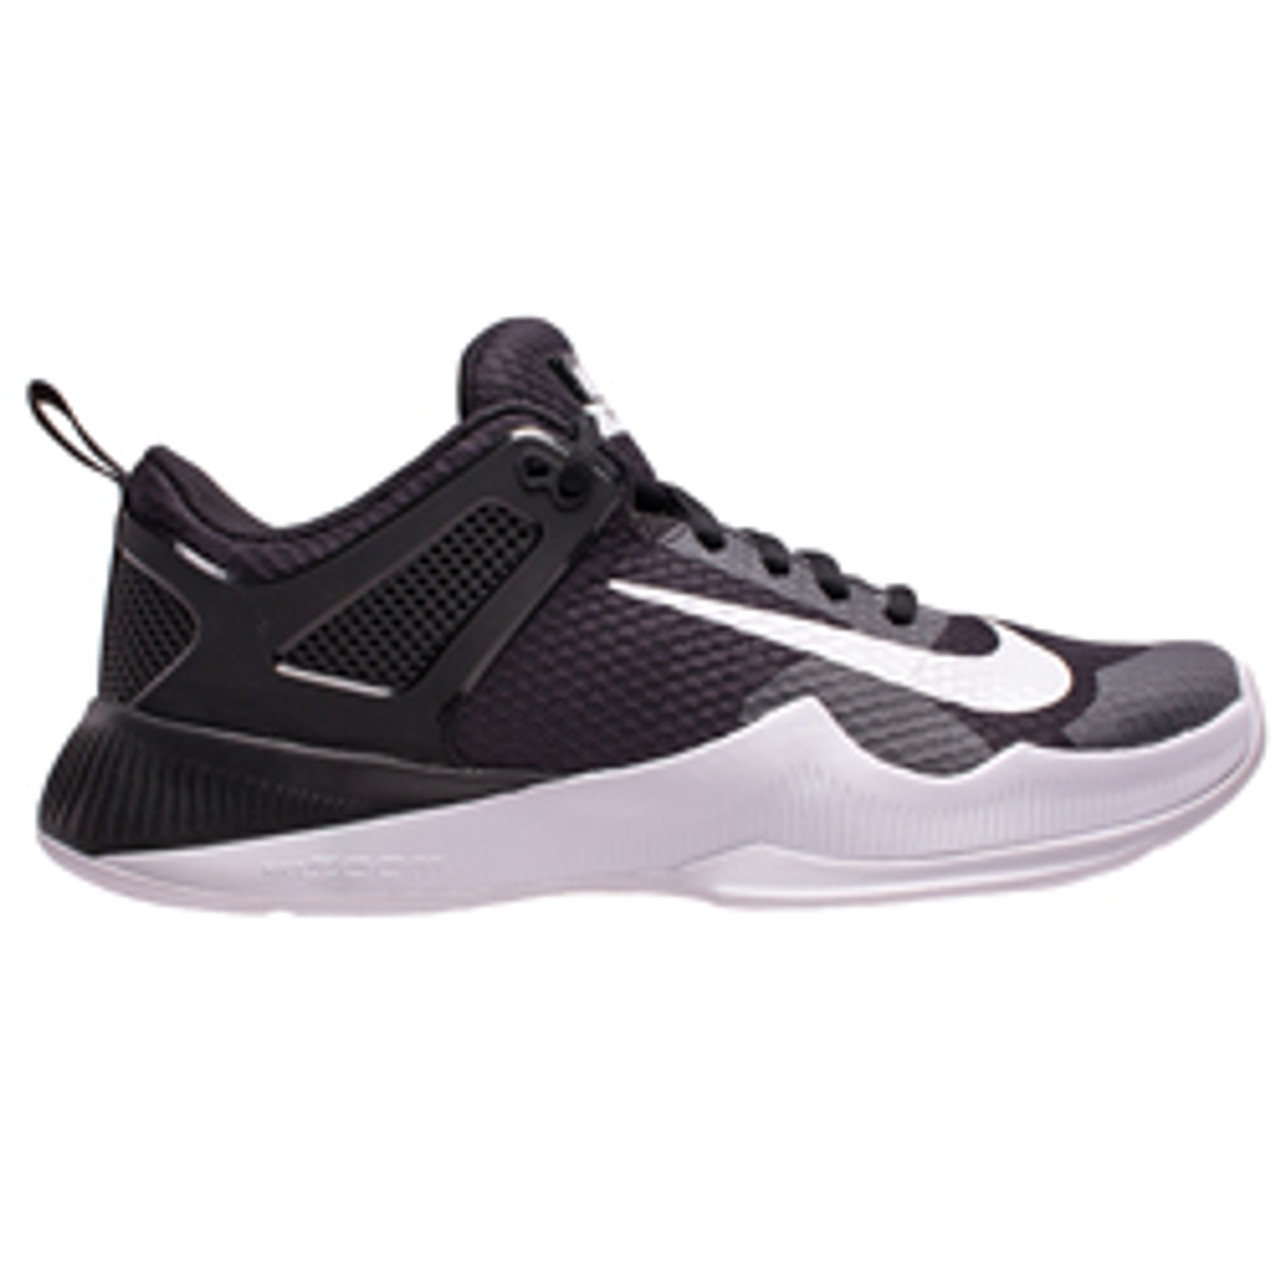 nike air hyperace volleyball shoes